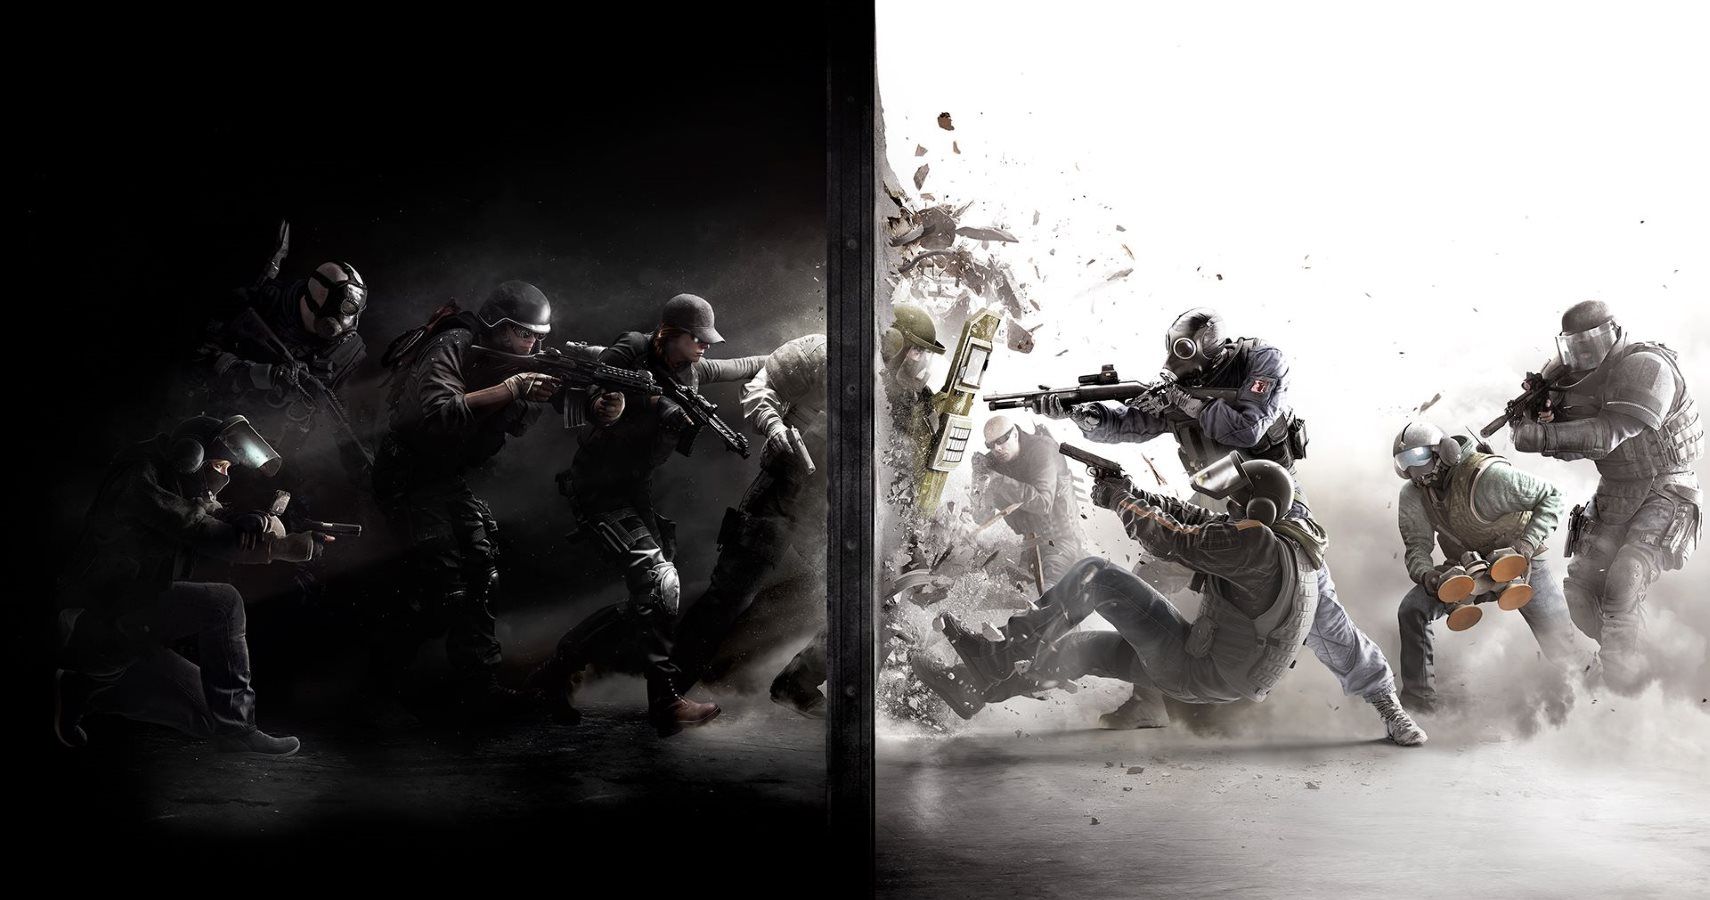 Rainbow Six: Siege Is Toning Down Violent Imagery In Order To Appeal To New Markets